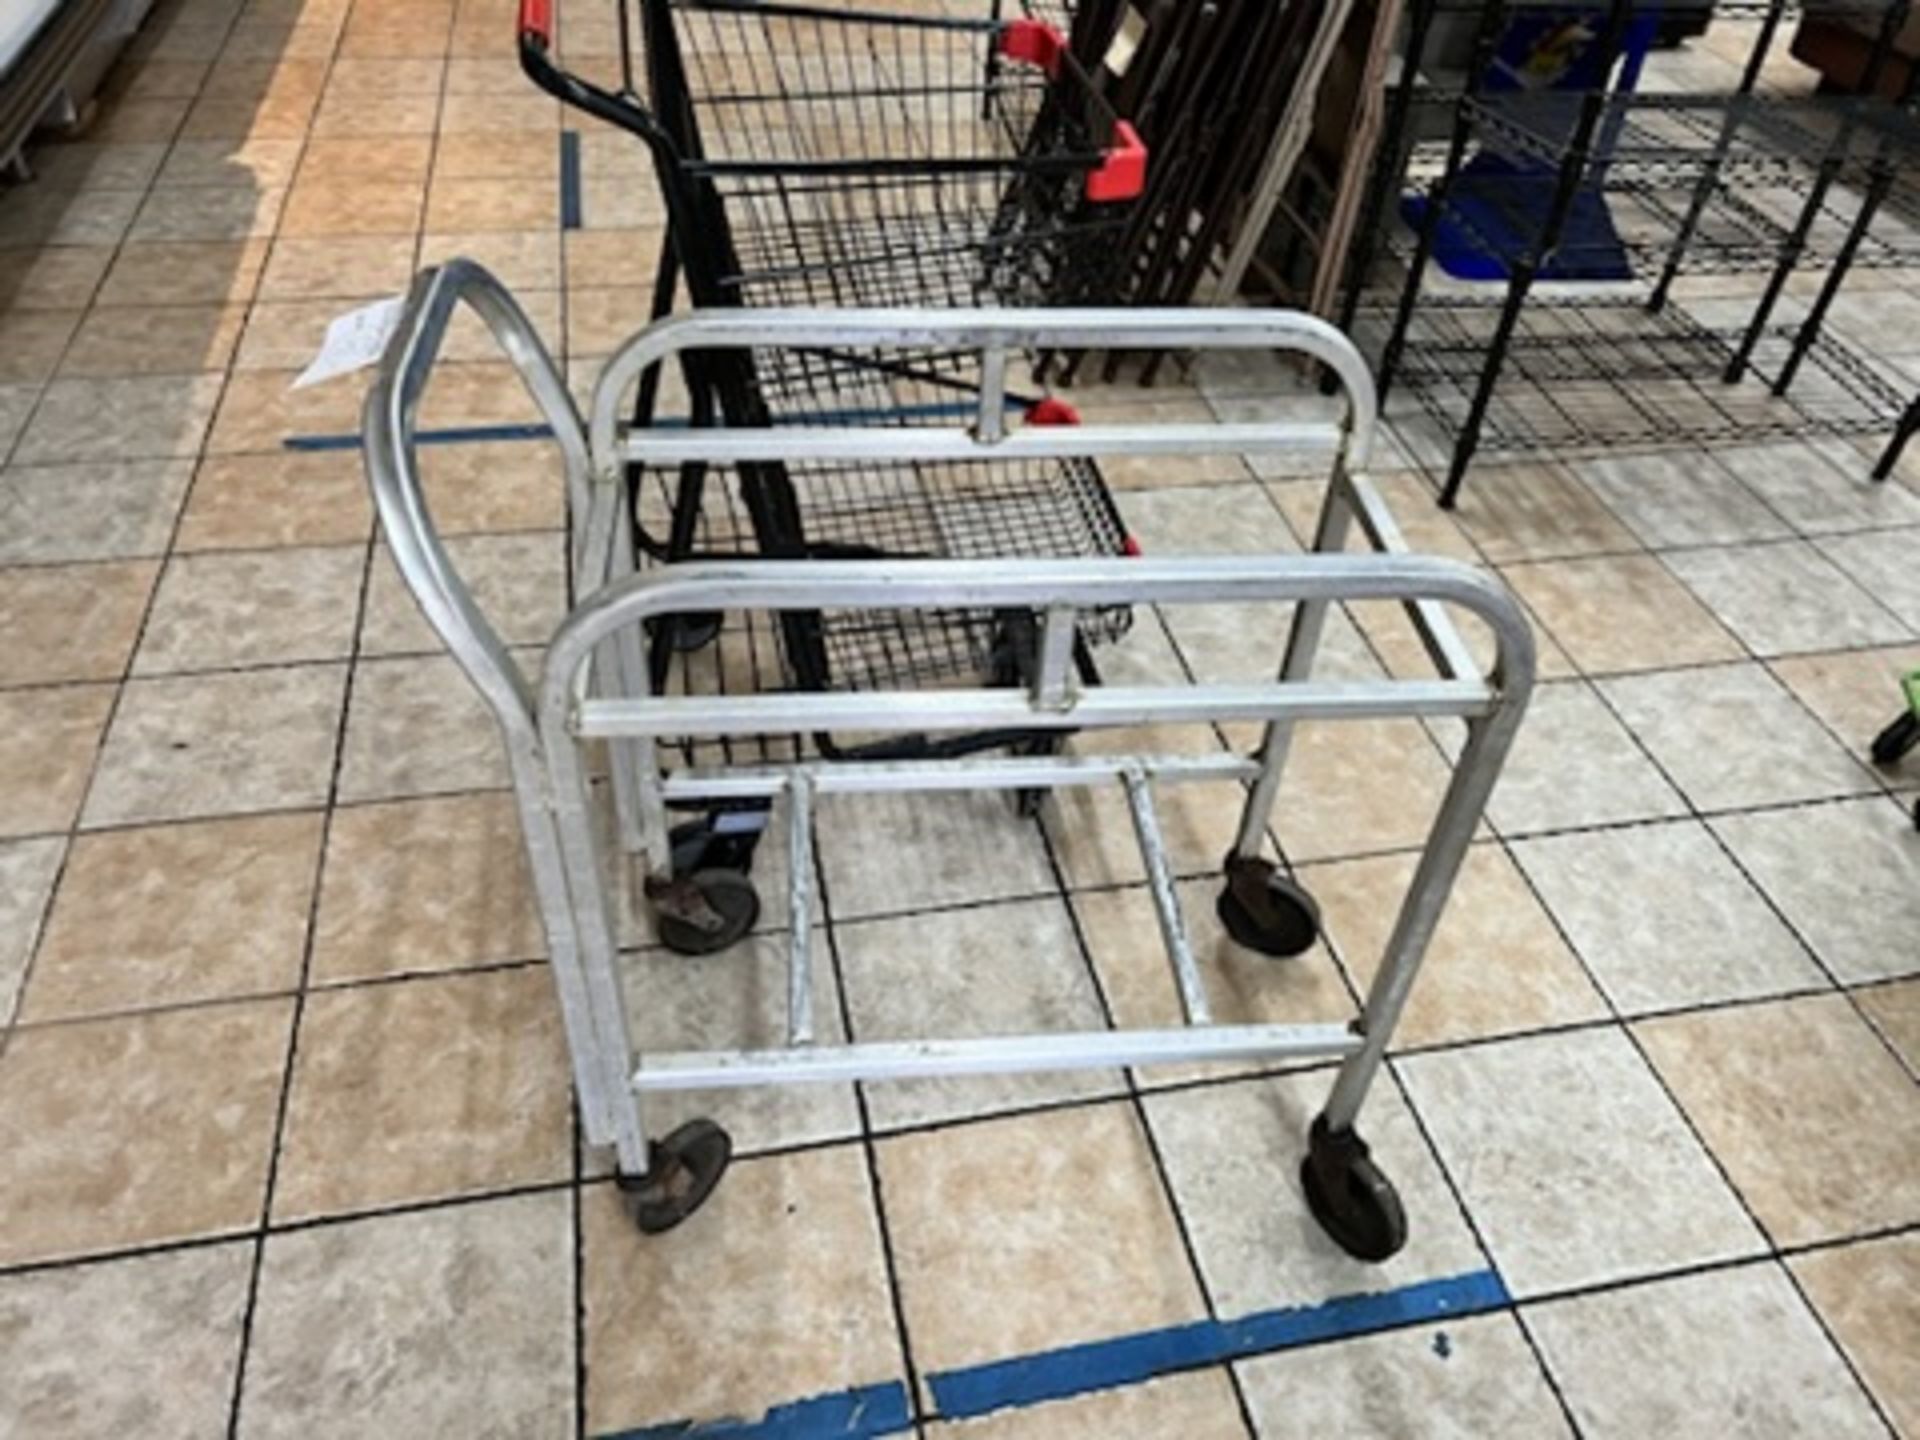 Lot of: (1) silver wheeled cart, and (1) grocery cart - Image 8 of 8